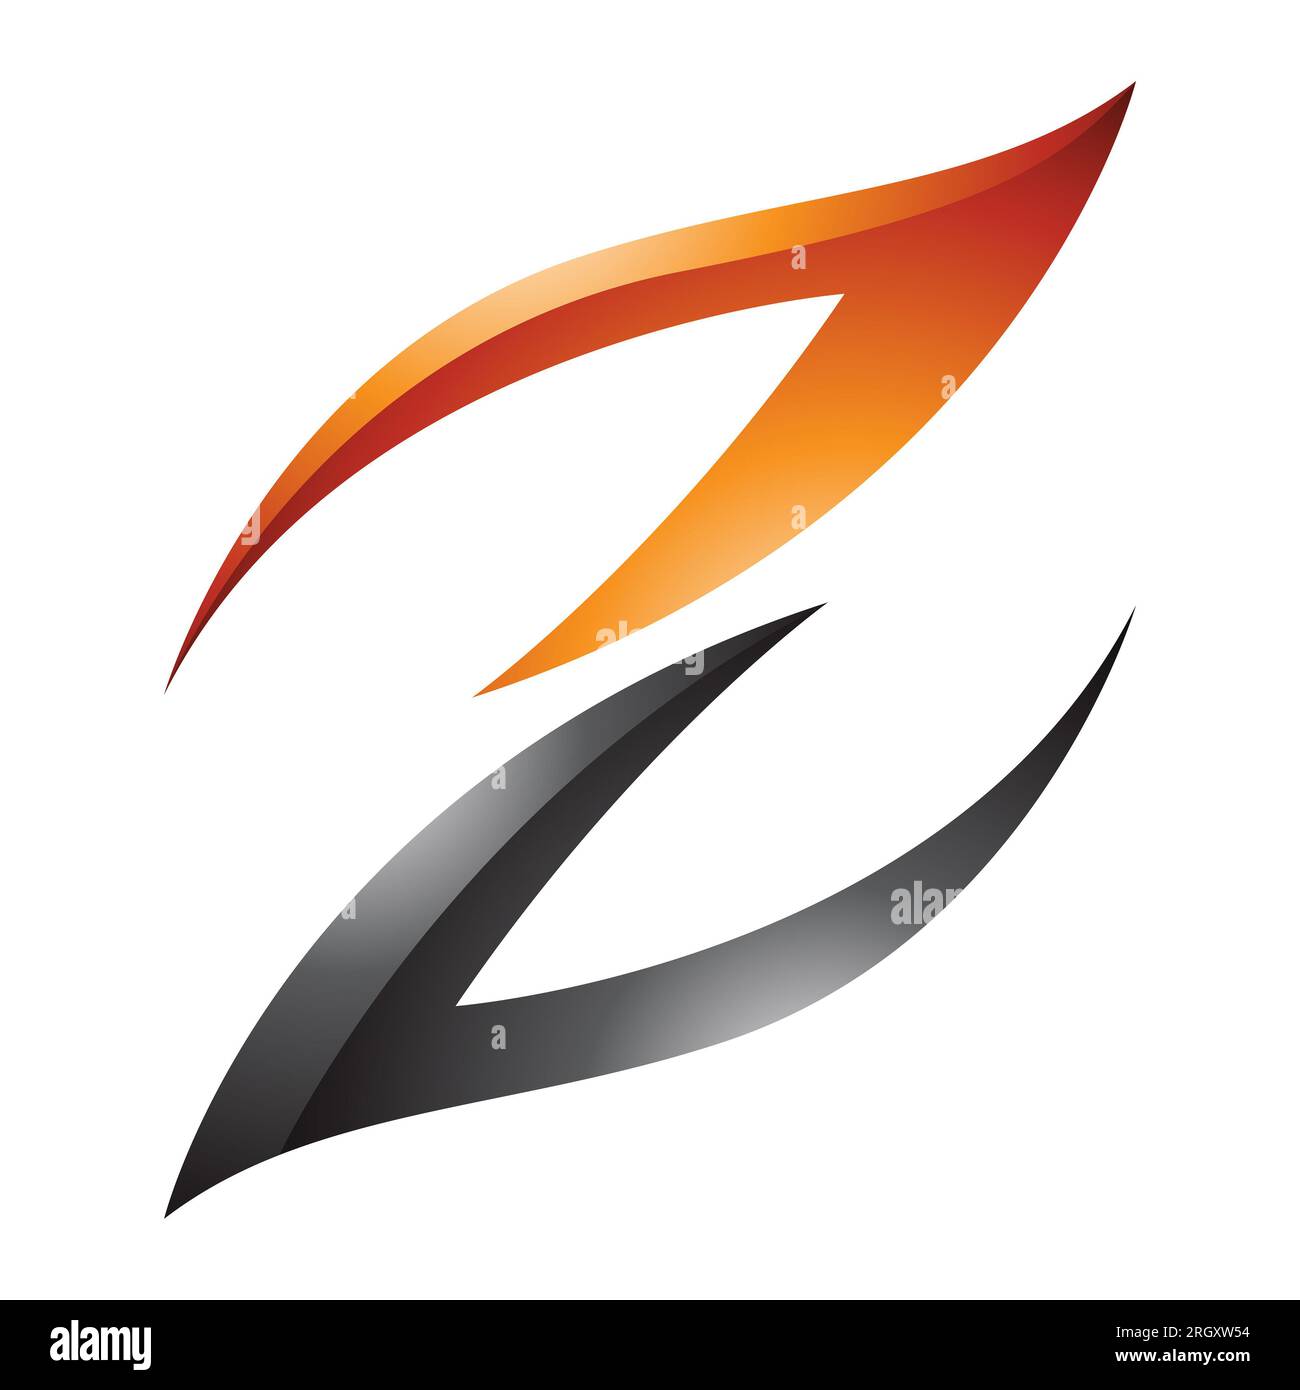 Orange and Black Glossy Fire Shaped Letter Z Icon on a White Background Stock Photo